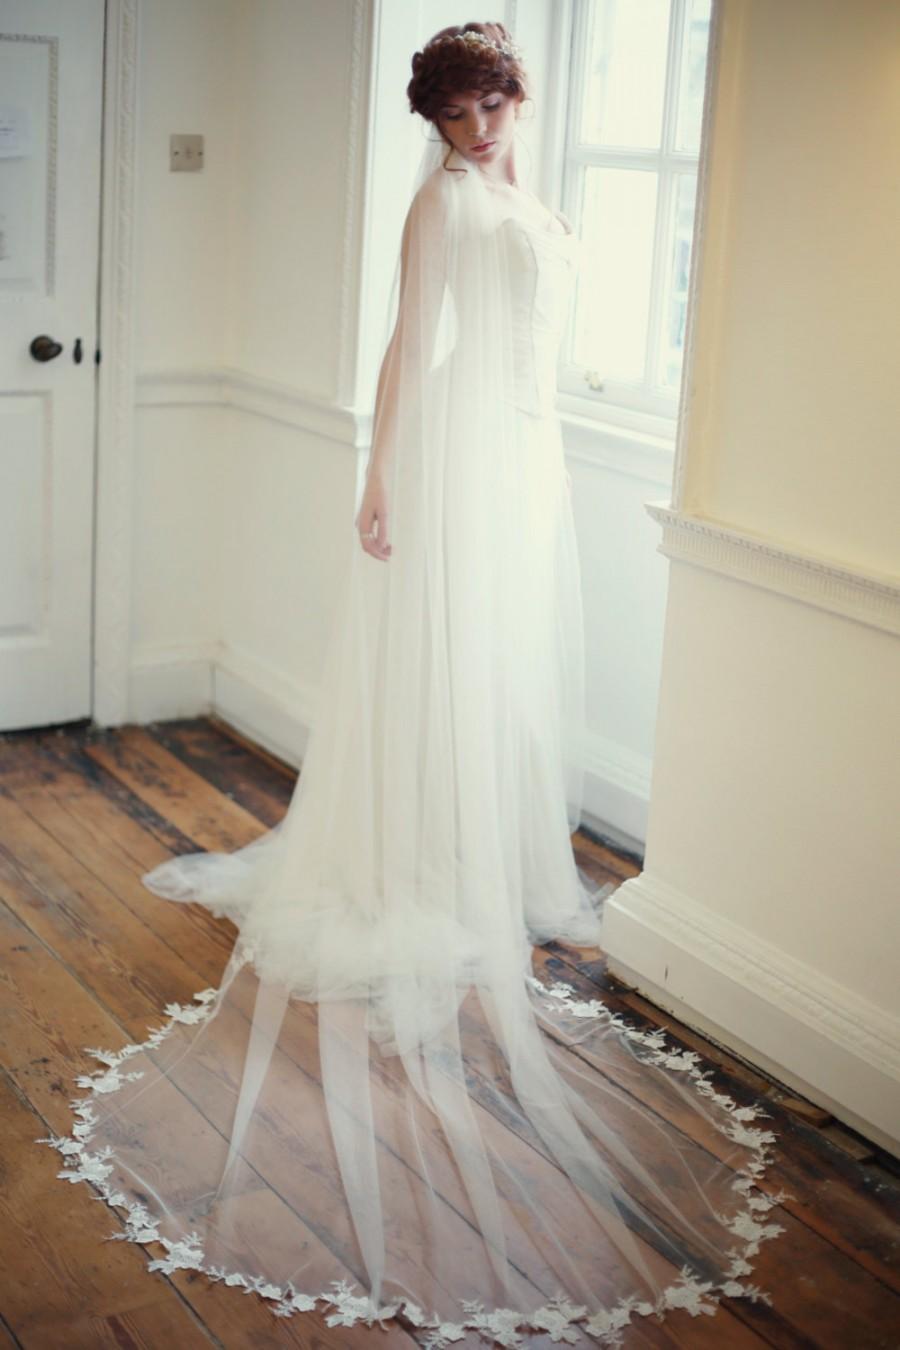 Mariage - Long lace veil with ethereal, hand pieced floral lace edging - pale ivory